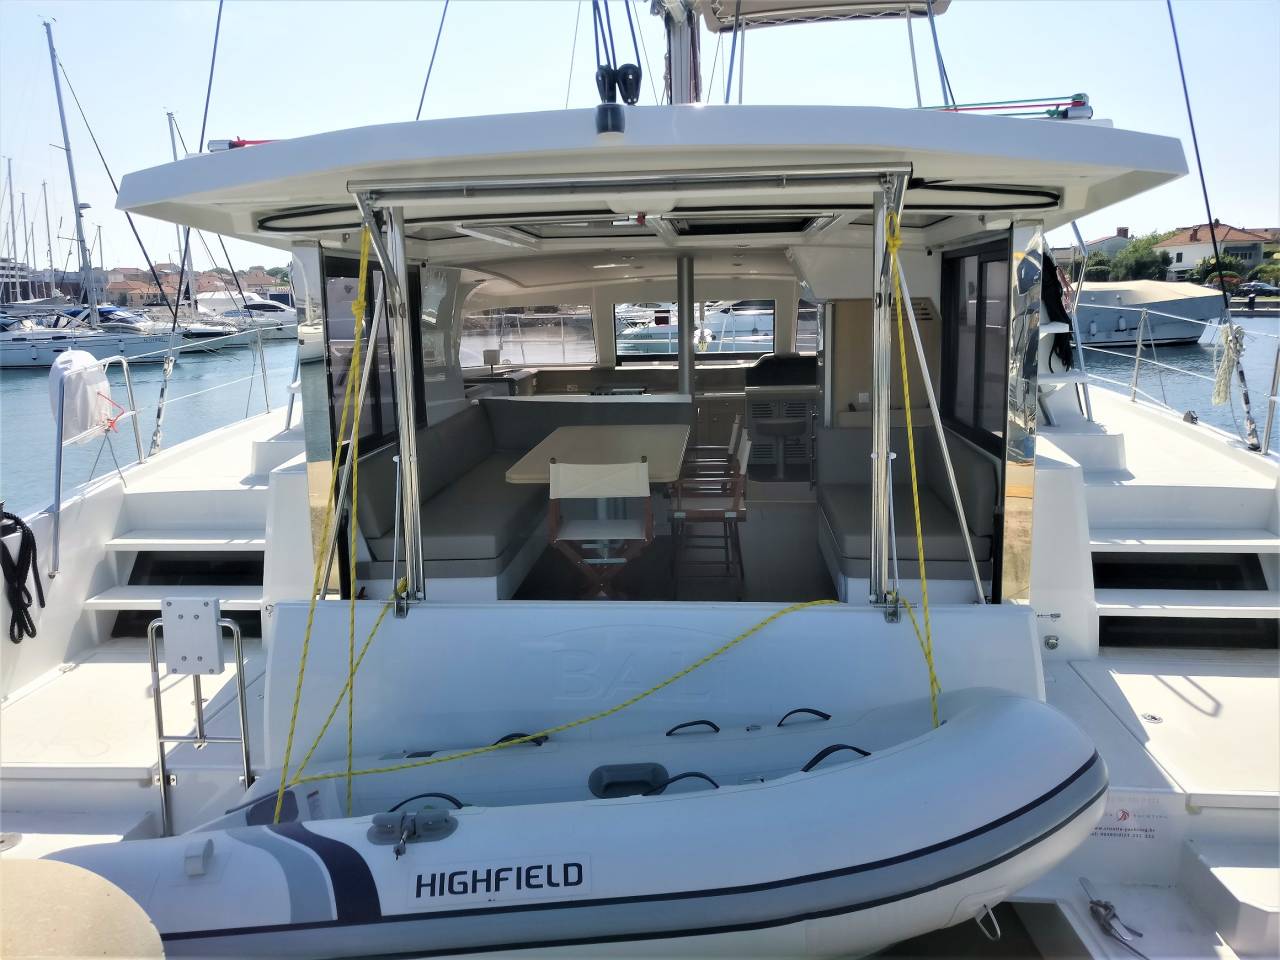 Bali 4.0 - Yacht Charter Fort Lauderdale & Boat hire in United States Florida Fort Lauderdale Fort Lauderdale 2